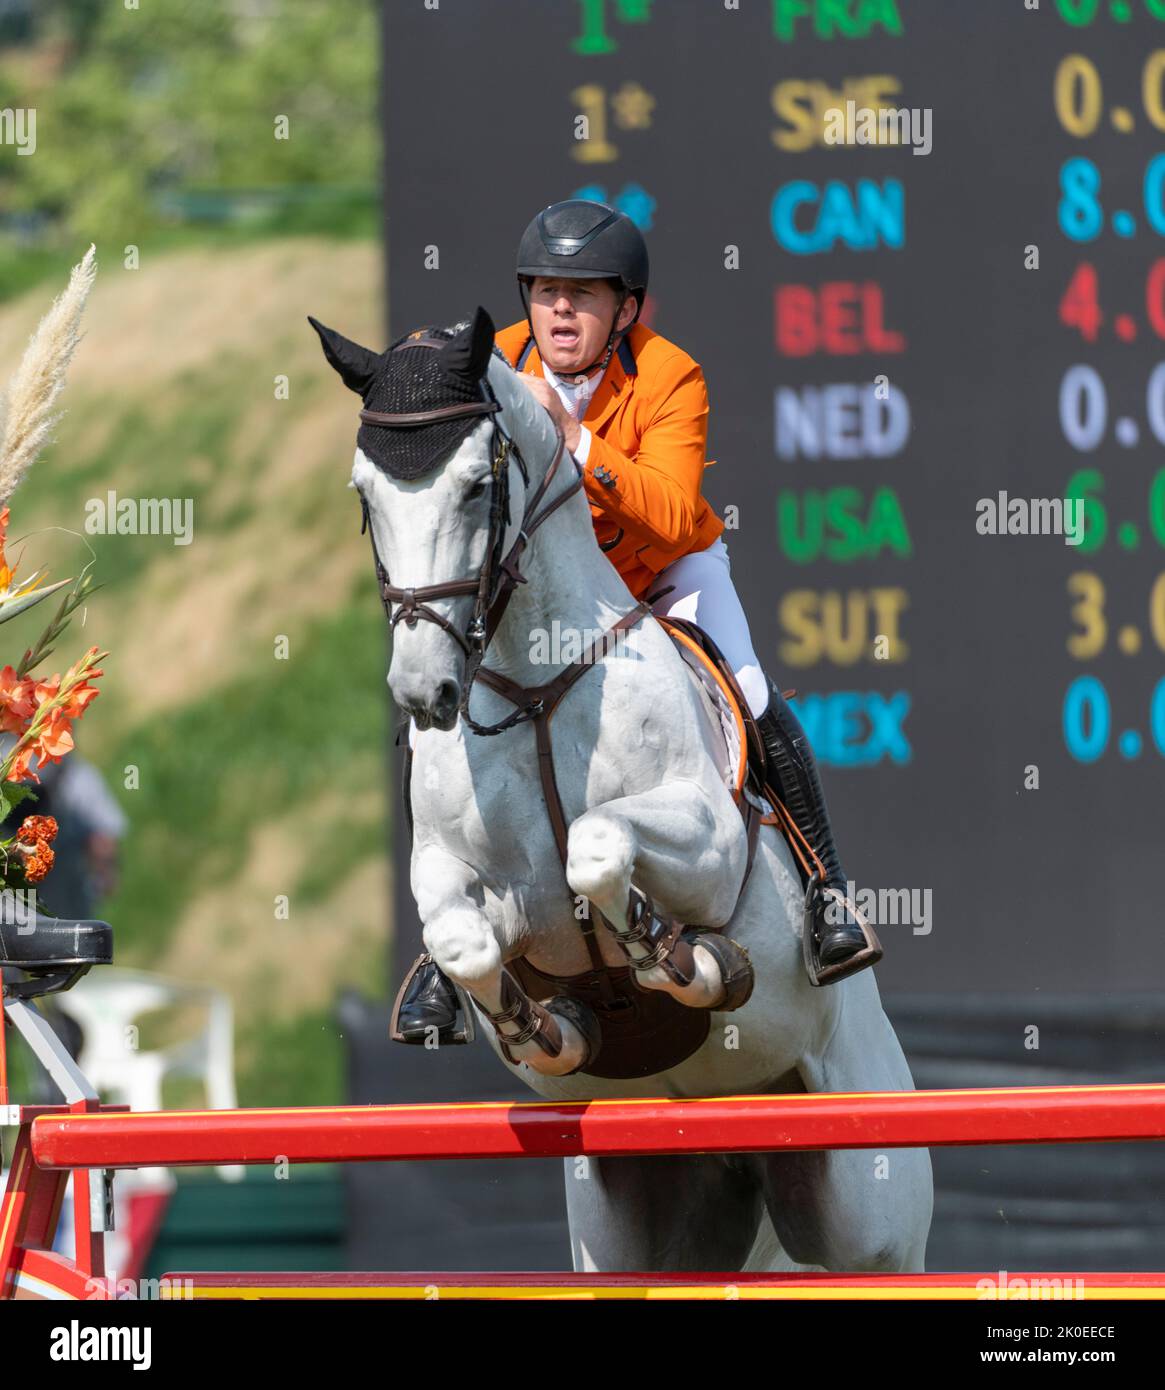 Calgary, Alberta, Canada, 2022-09-10, Johnny Pals (NED) equitazione Charley , CSIO Spruce Meadows Masters, - BMO Nations Cup Foto Stock